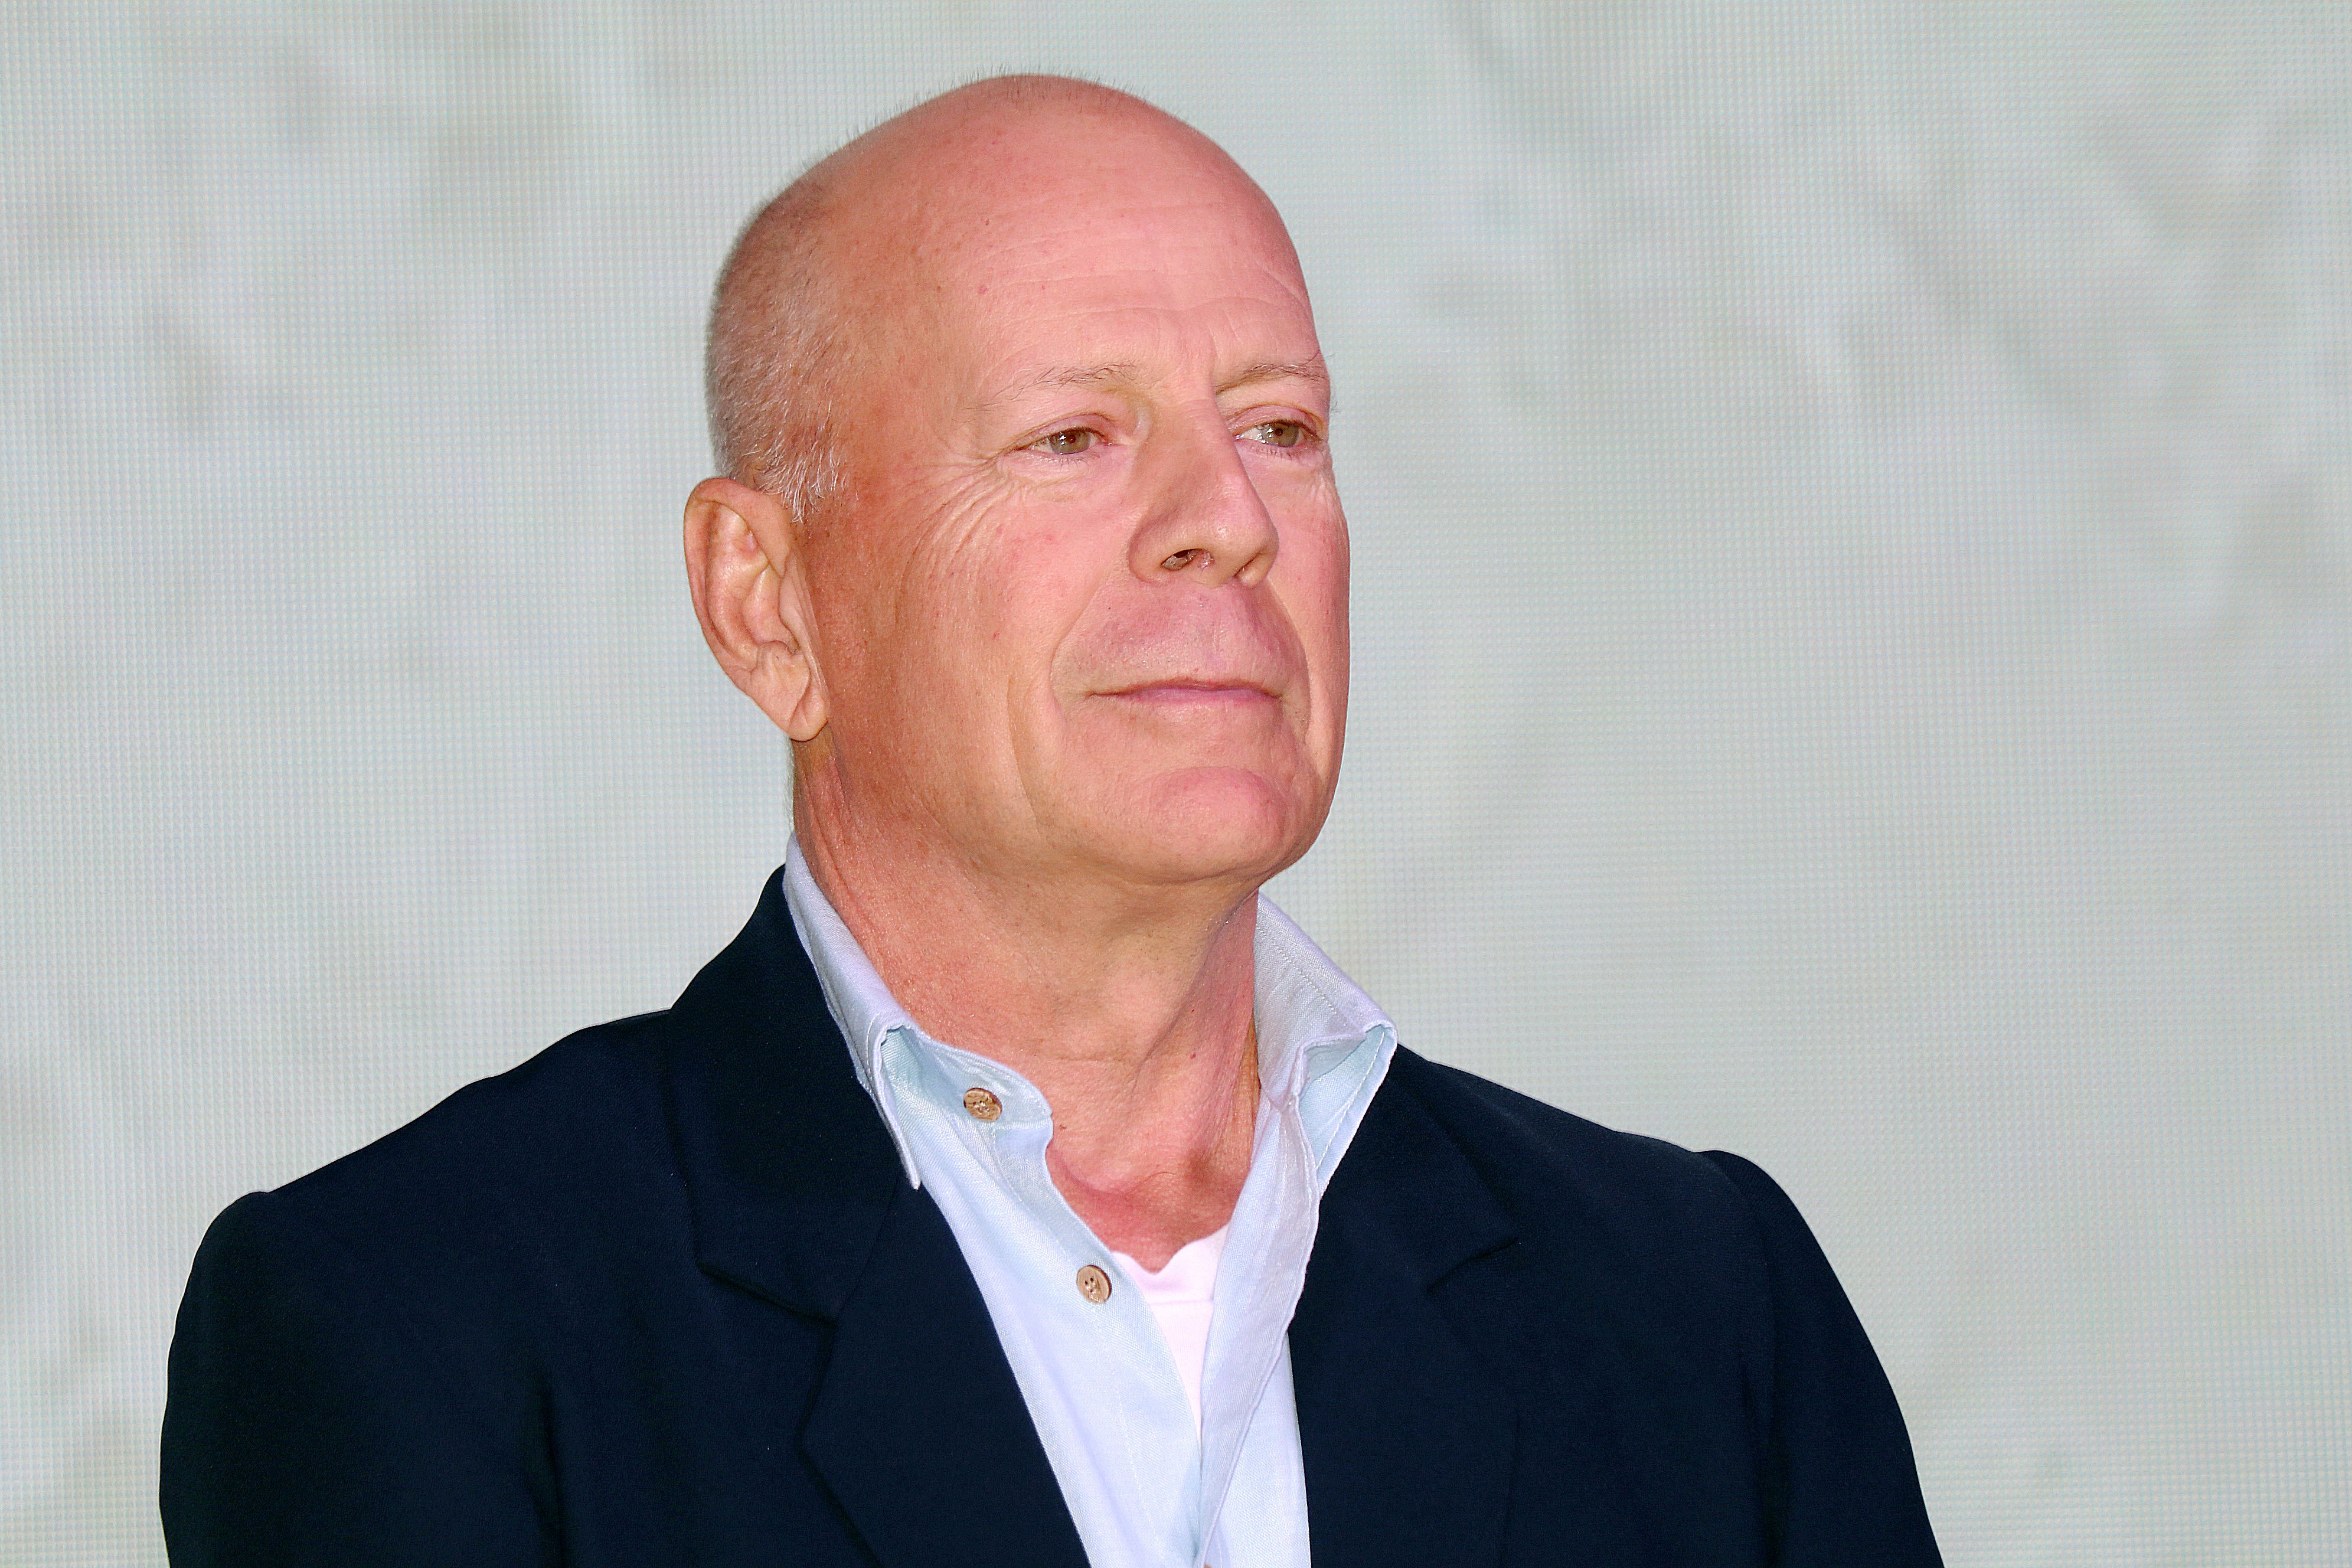 Bruce Willis during the CocoBaba and Ushopal activity on November 4, 2019 in Shanghai, China. | Source: Getty Images